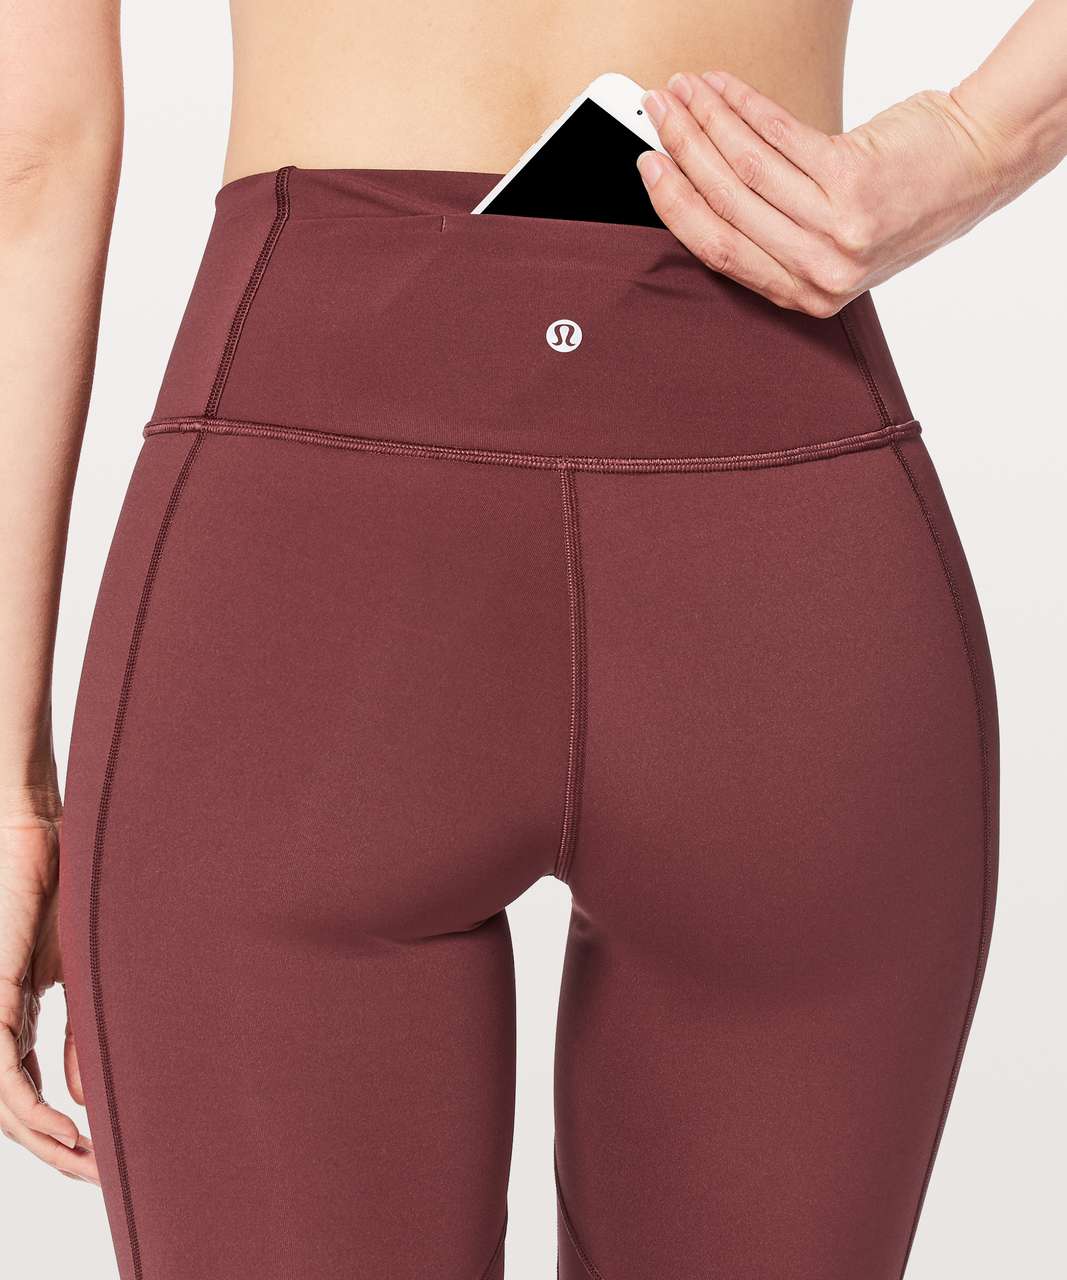 Which Lululemon Leggings Have the Symbol on the Leg? - Playbite